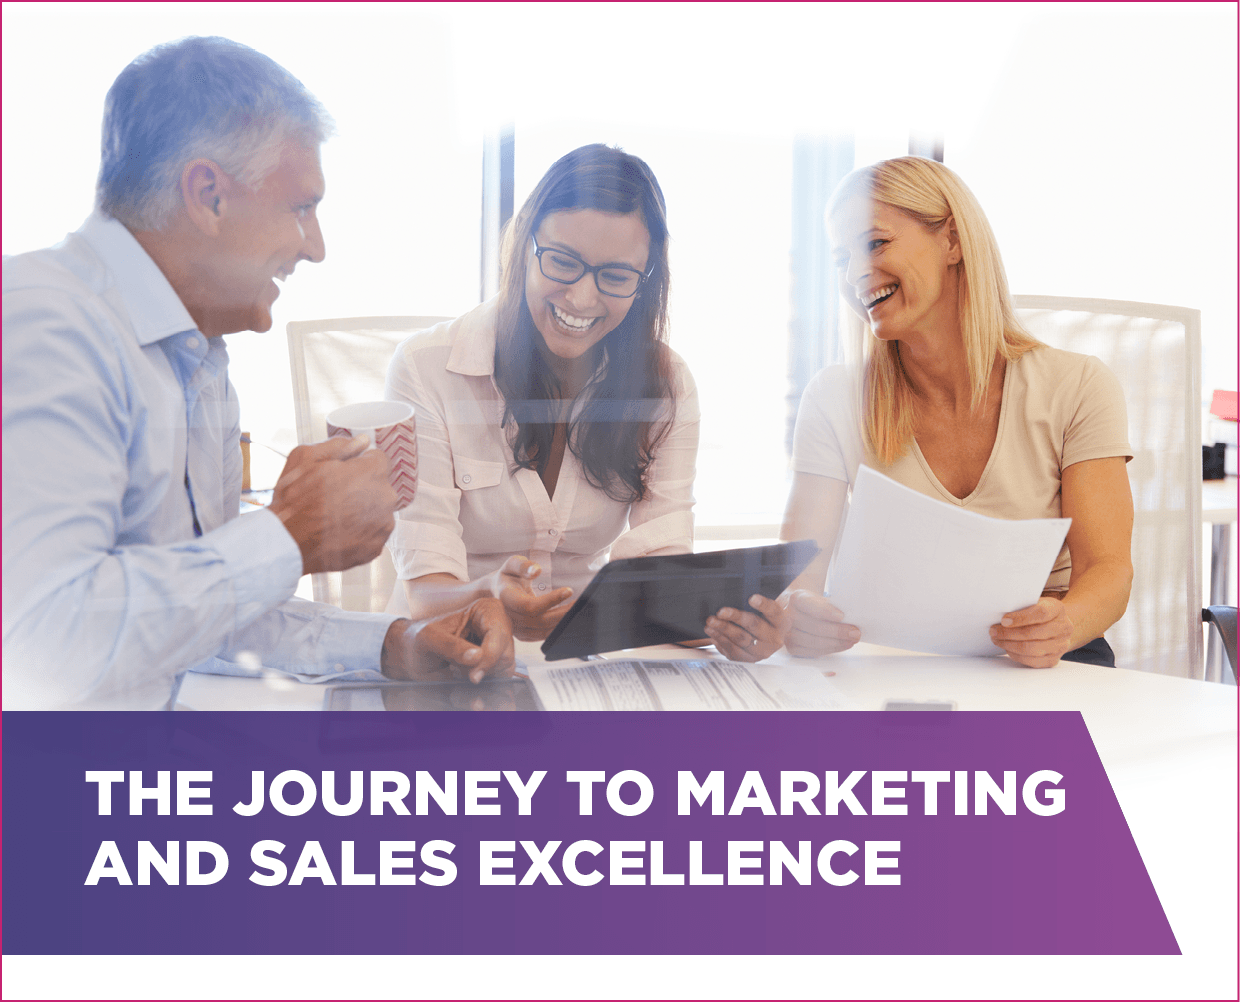 The journey to marketing and sales excellence